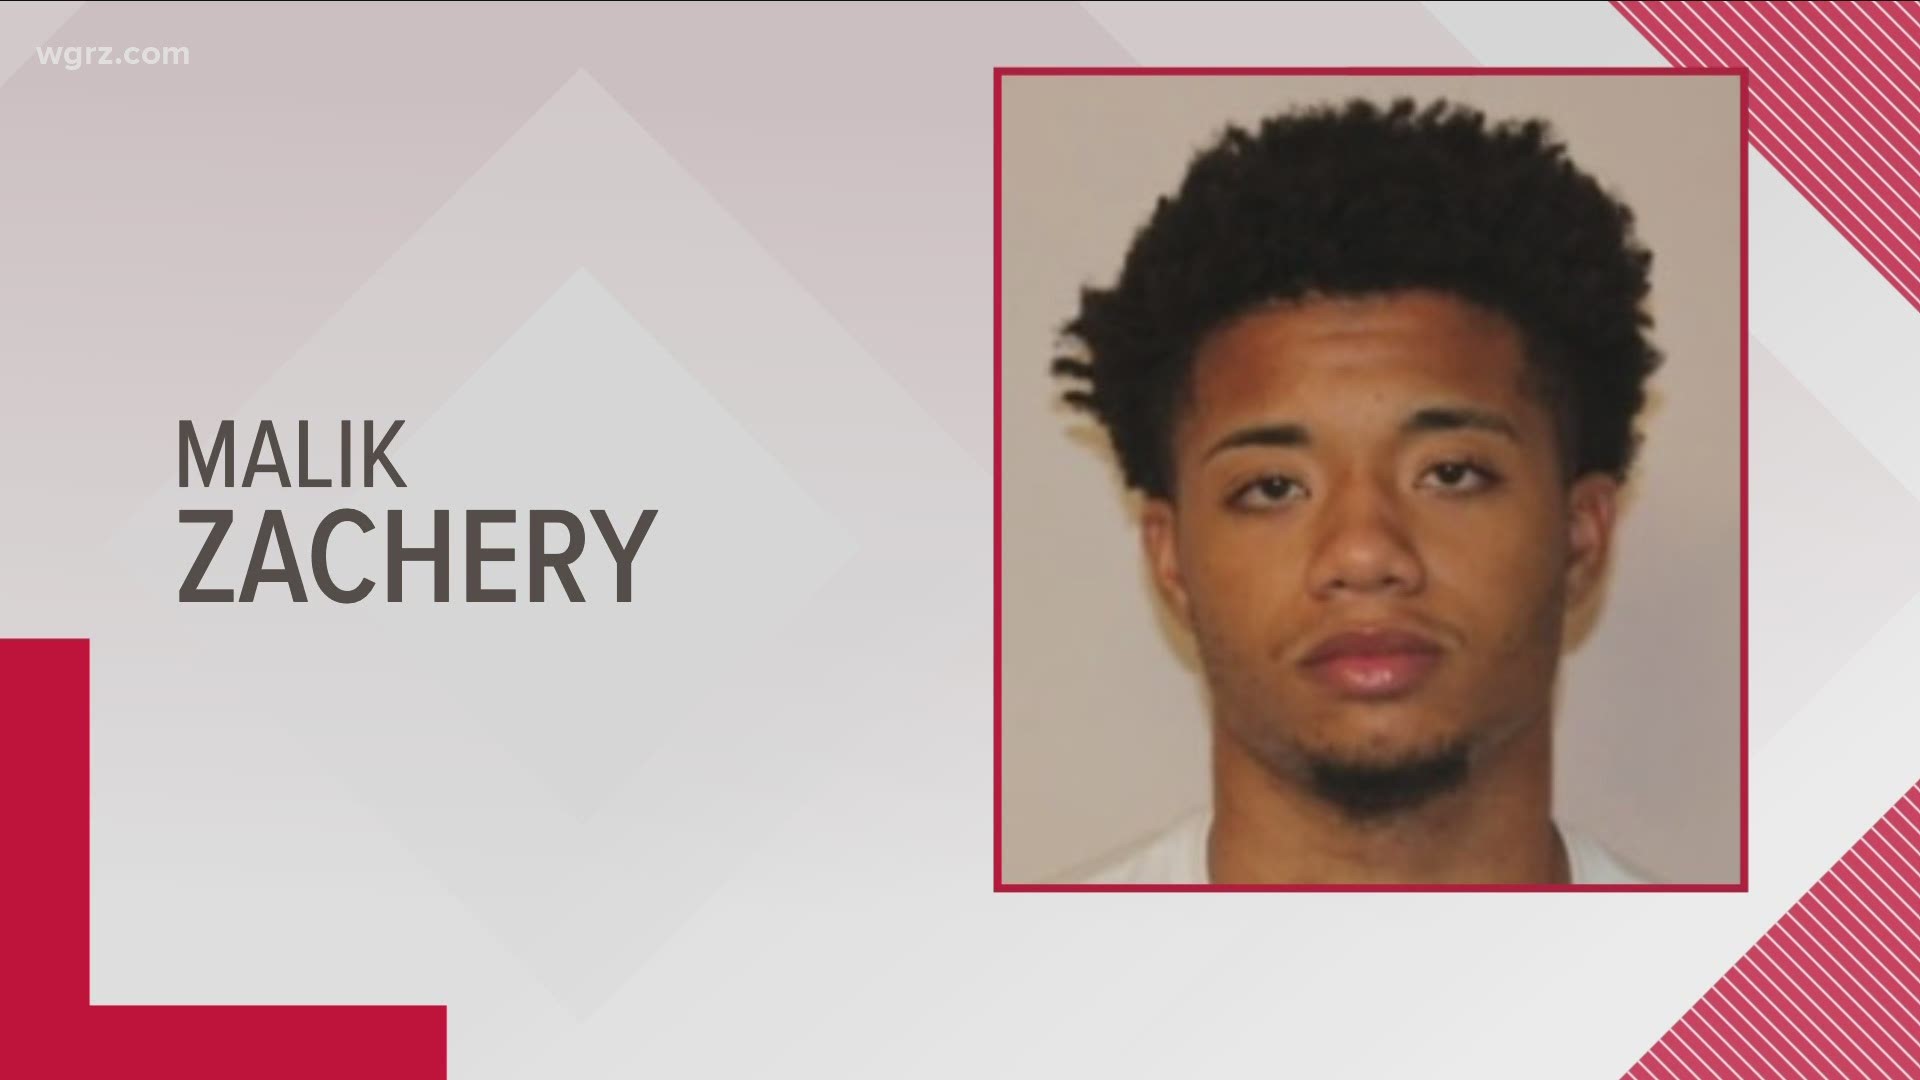 U-B player Malik Zachery stabbed one of the CAnisius players in the leg.